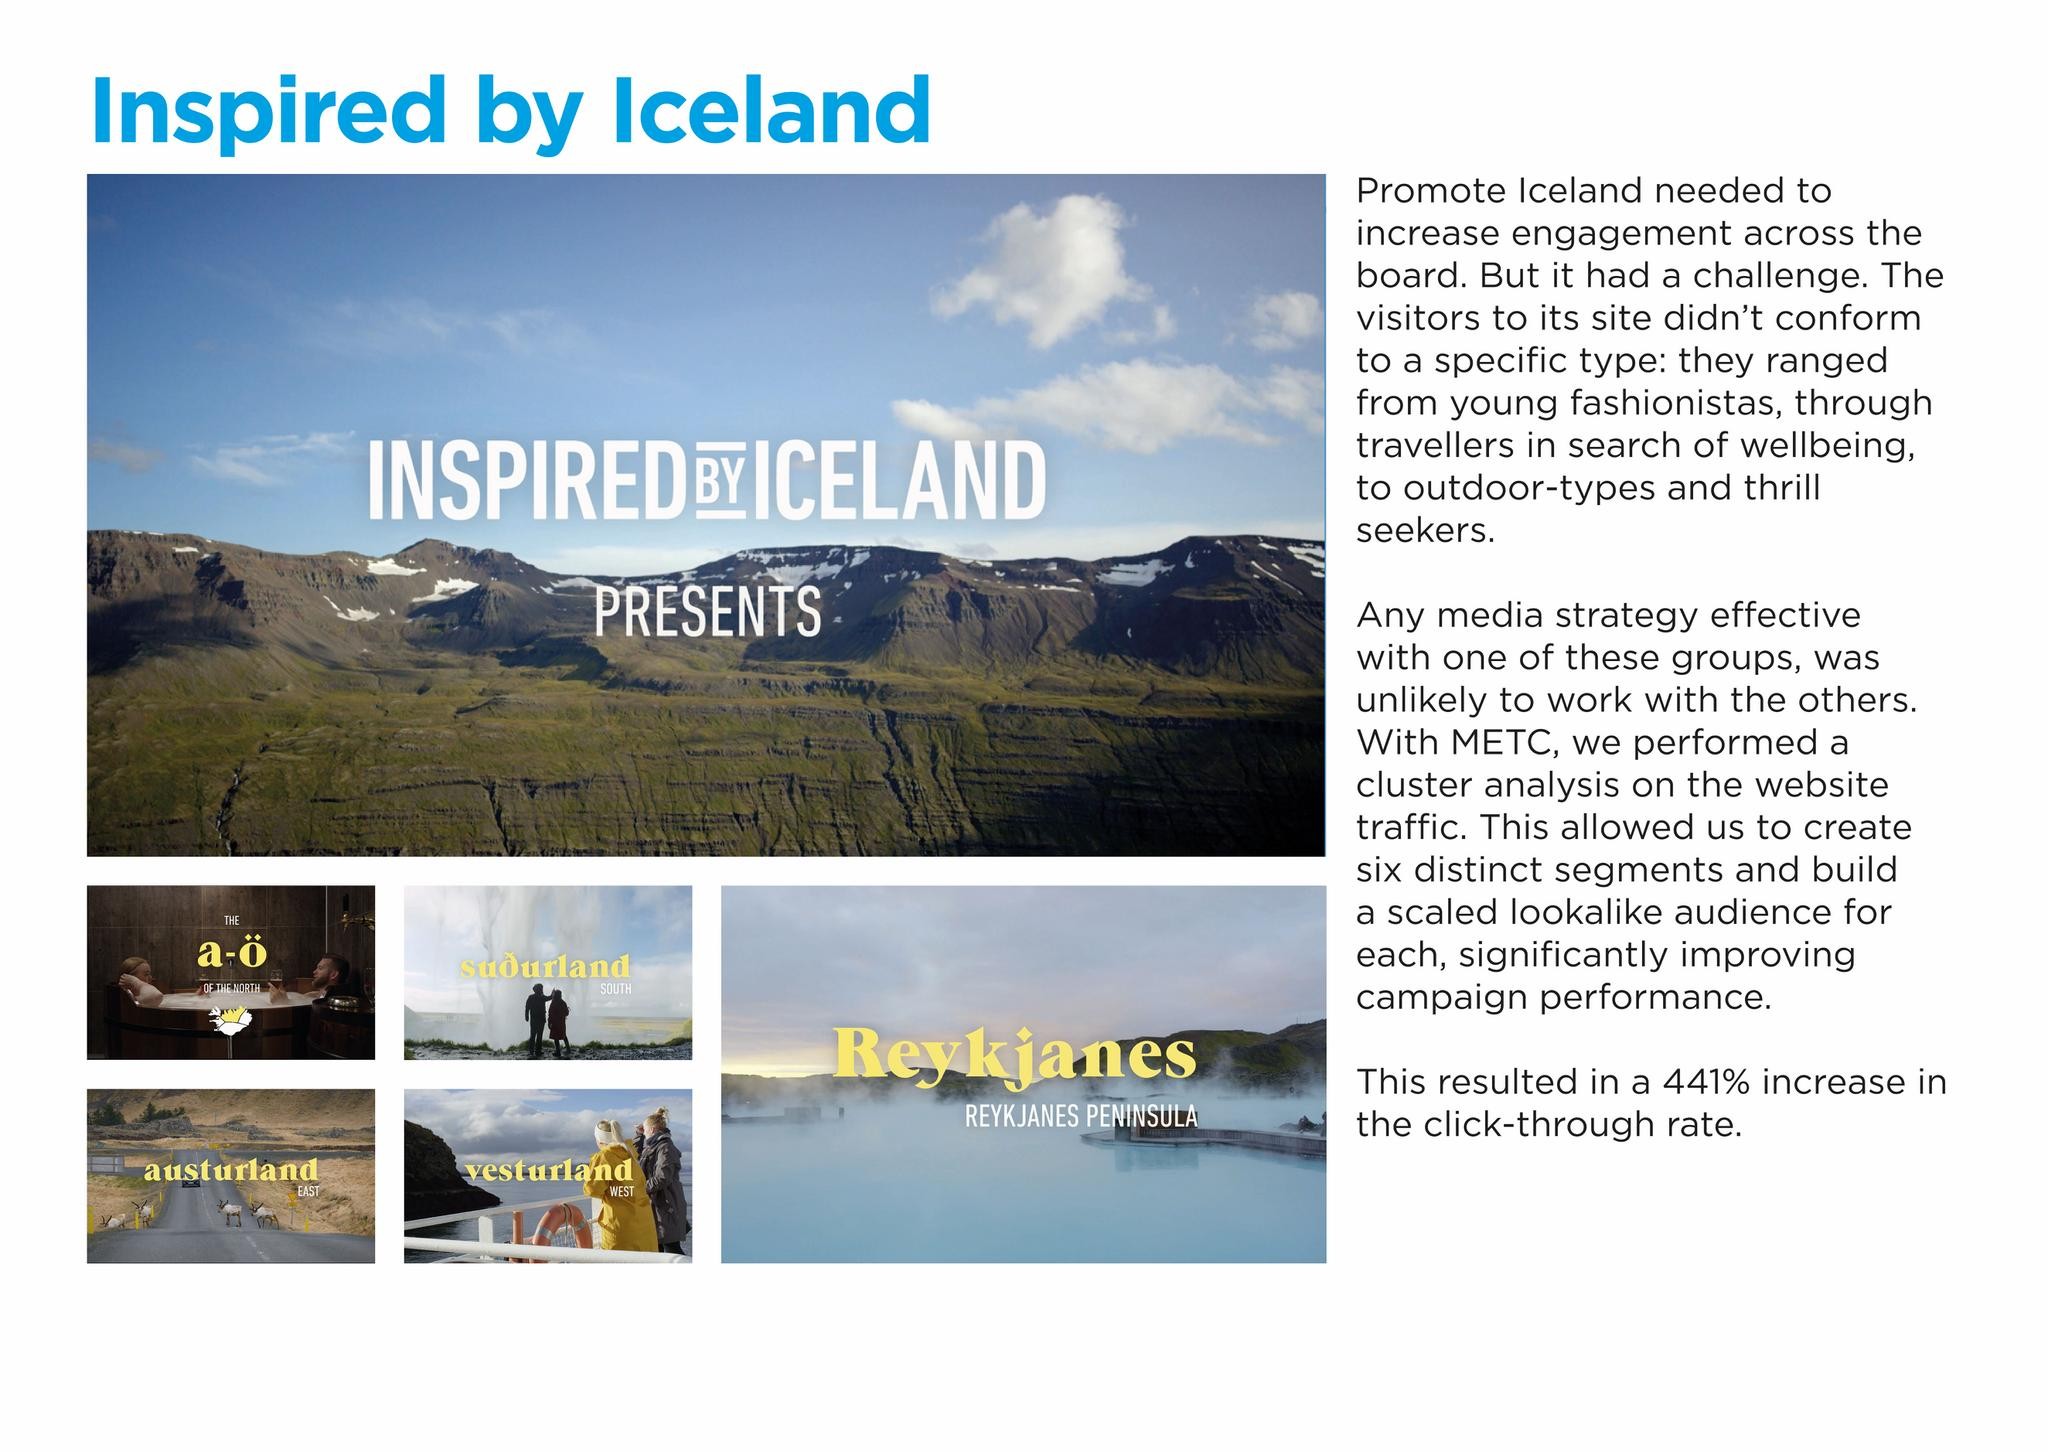 Cluster analysis & lookalike audiences boost engagement for Iceland